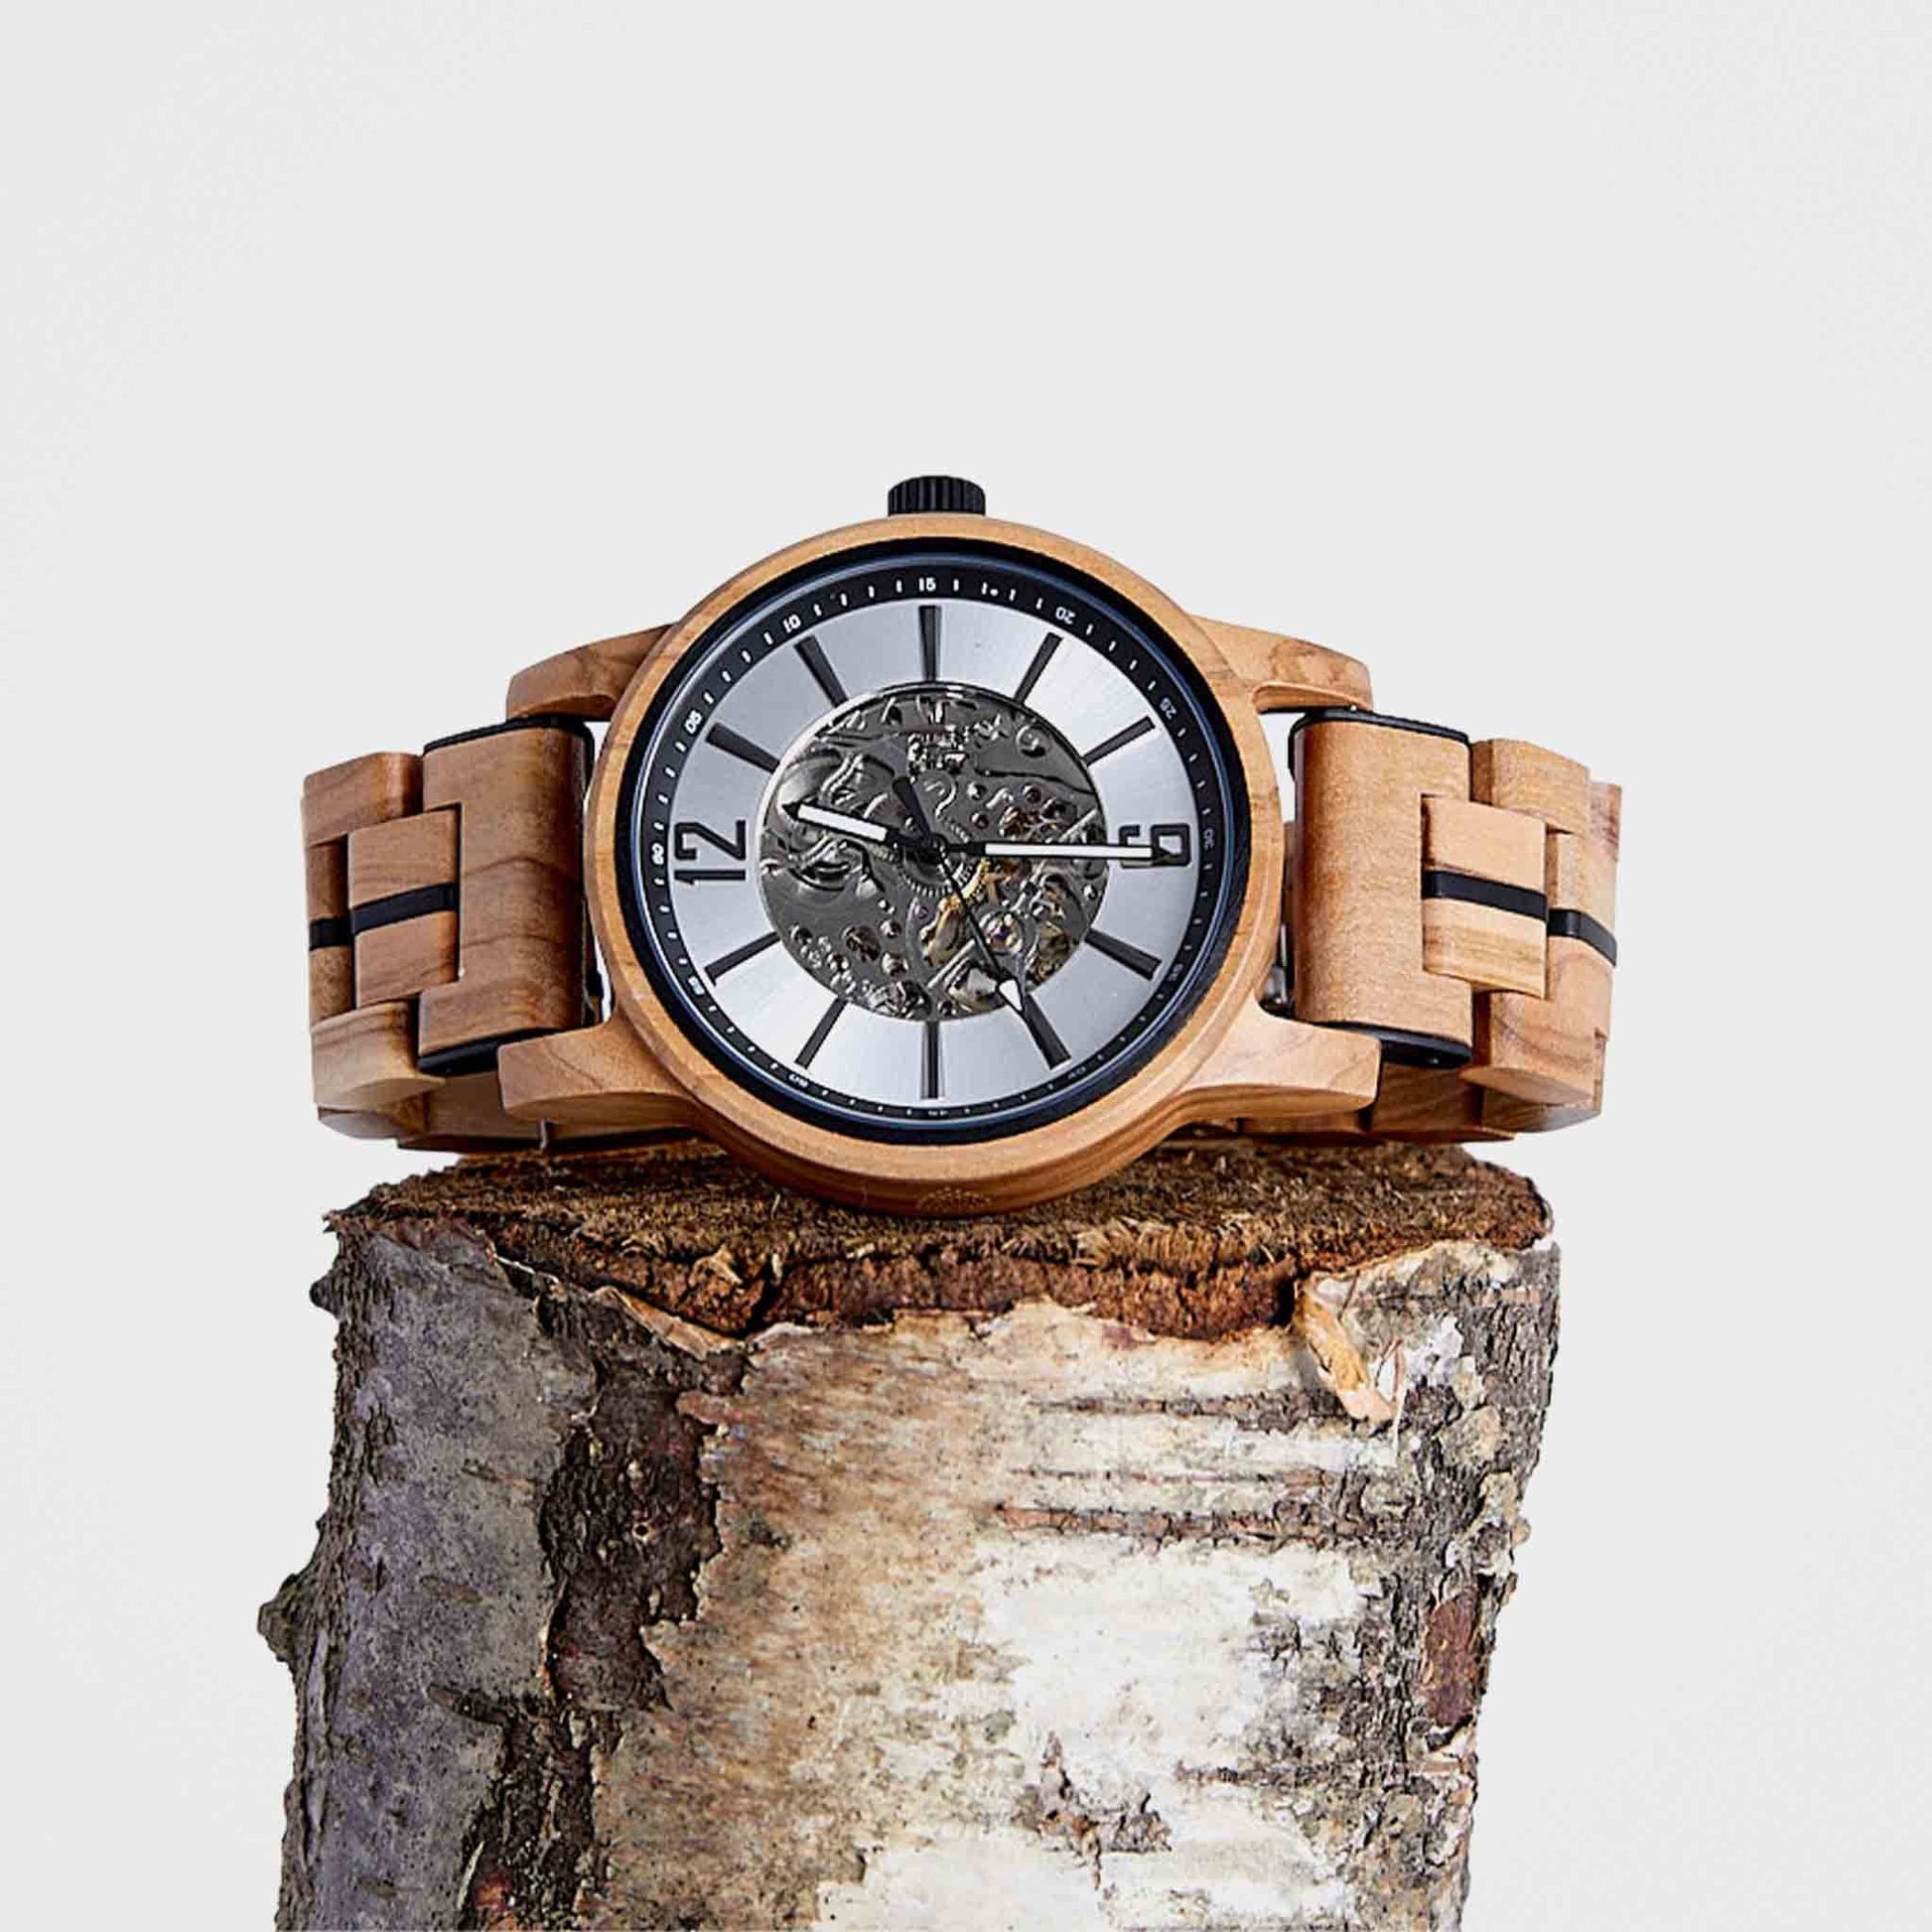 Sustainable Mechanical Watch For Men: The Sycamore